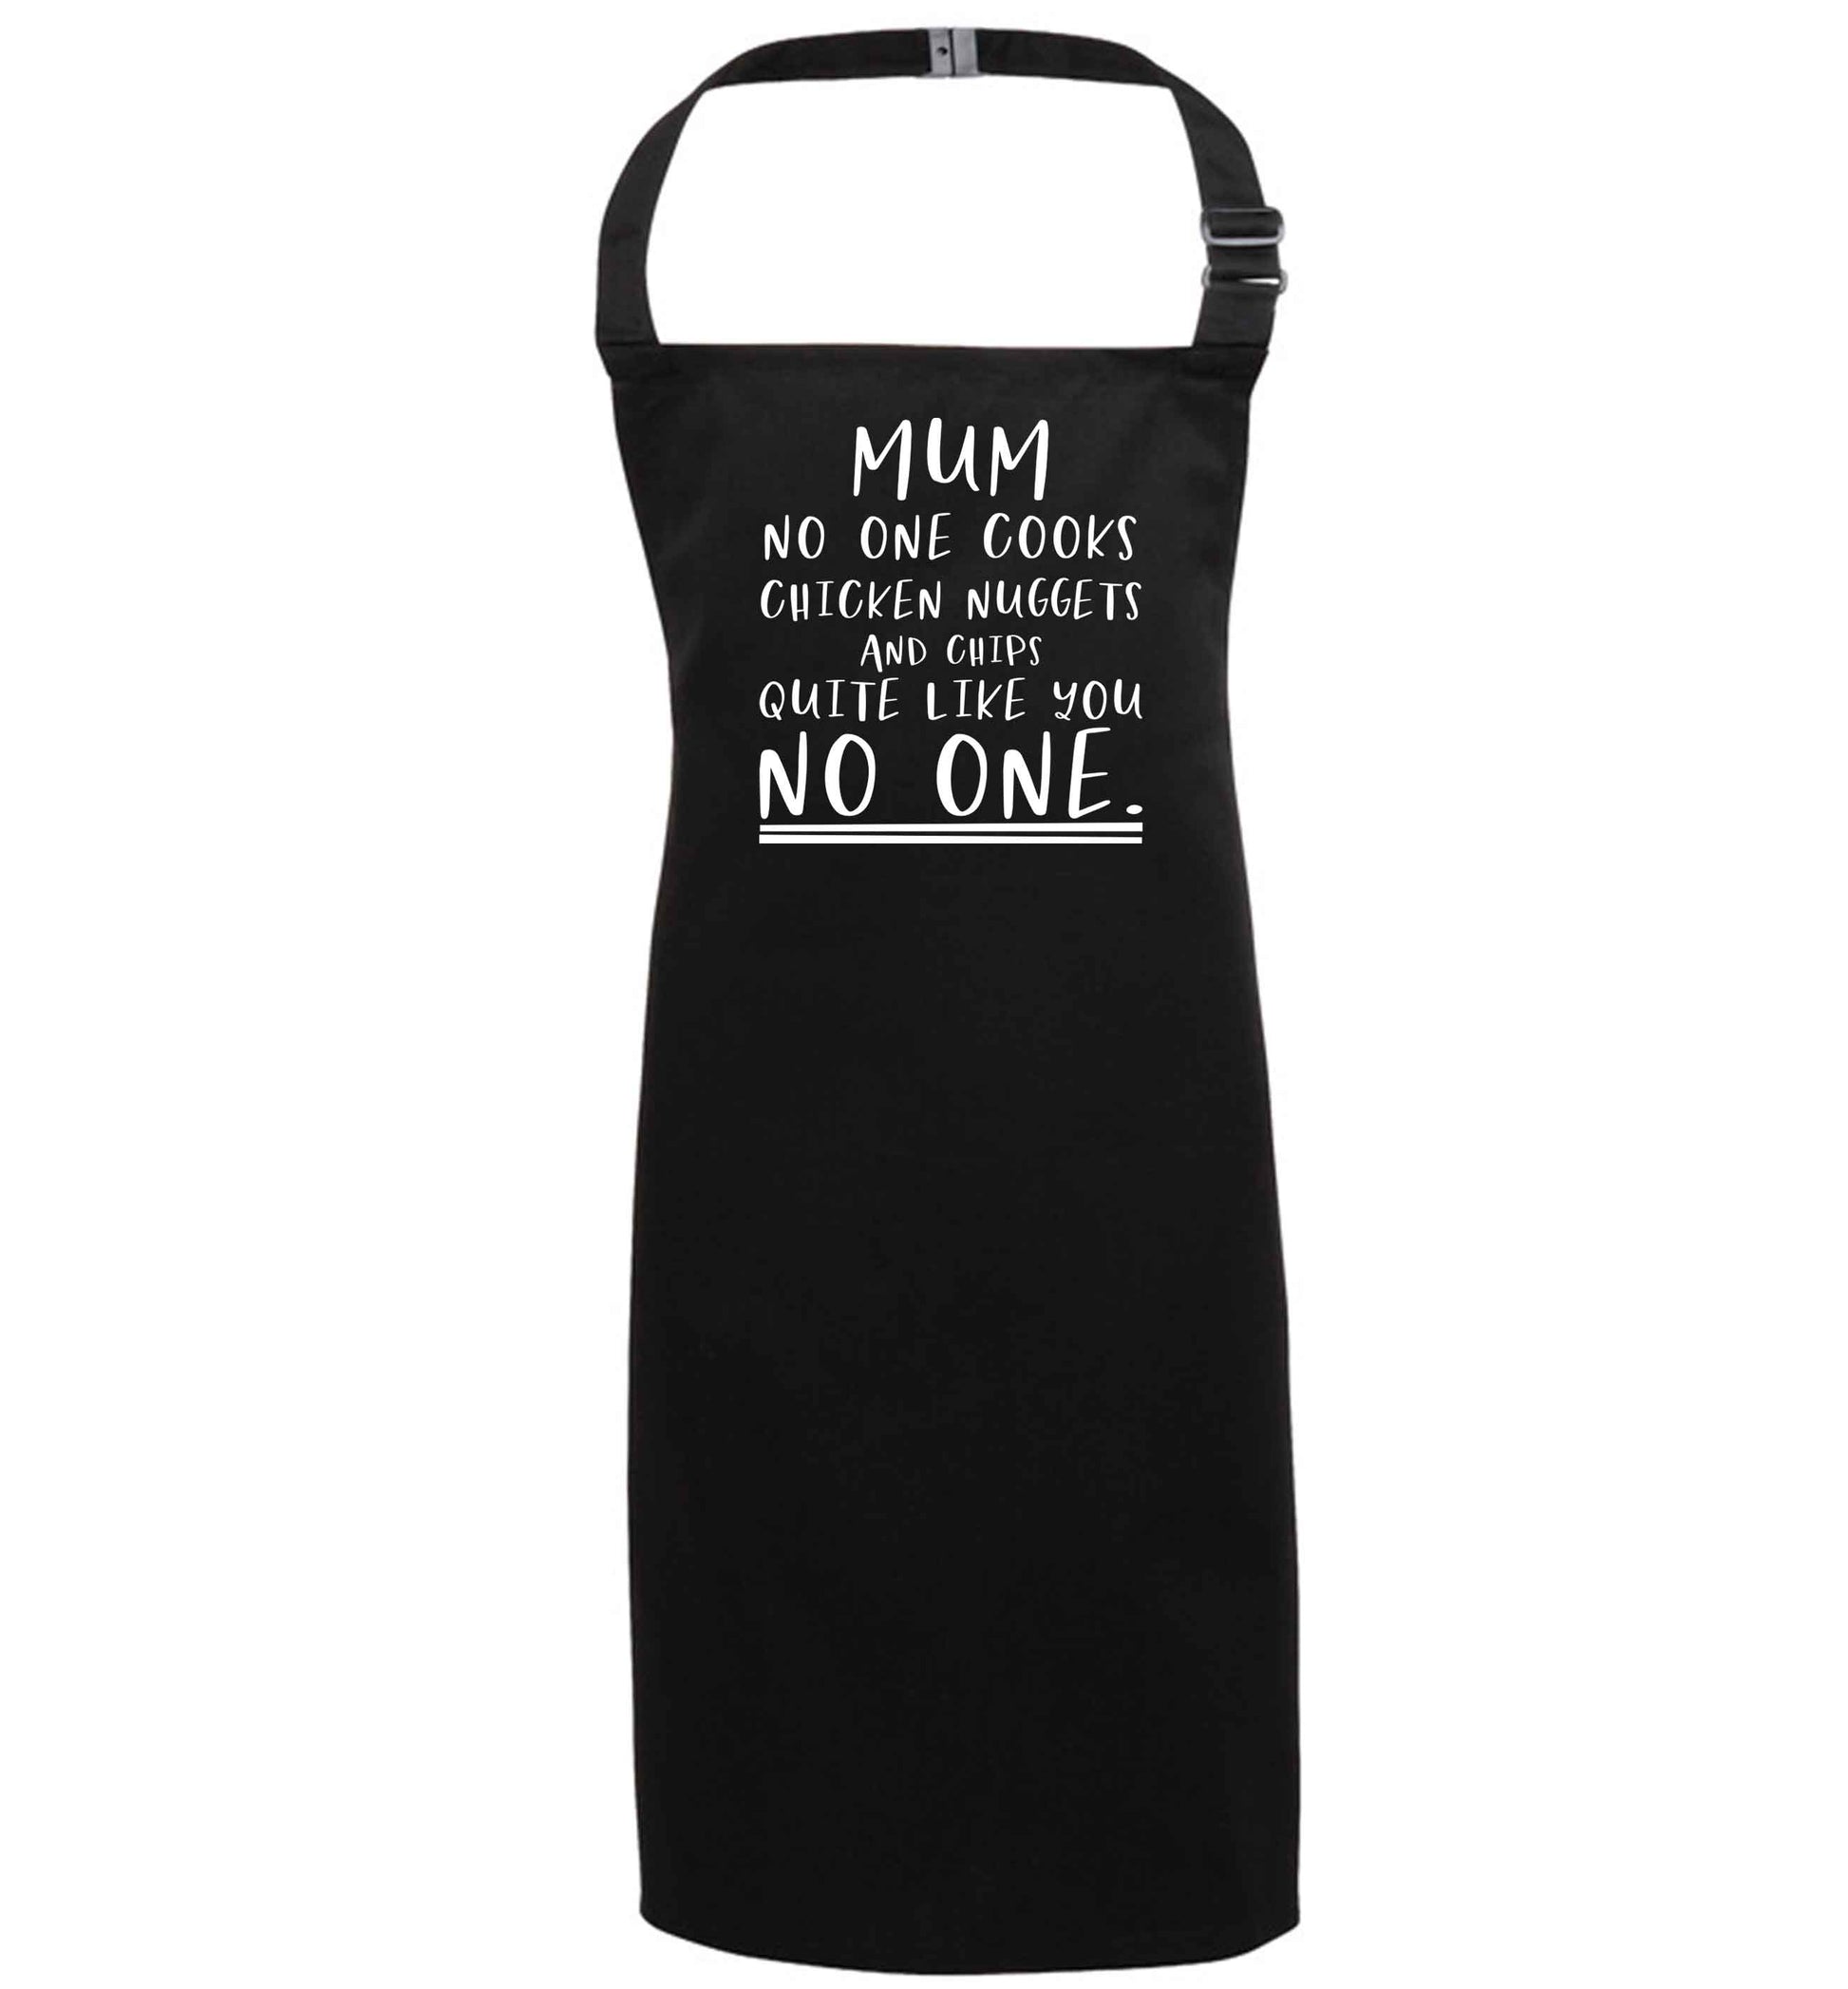 Super funny sassy gift for mother's day or birthday!  Mum no one cooks chicken nuggets and chips like you no one black apron 7-10 years